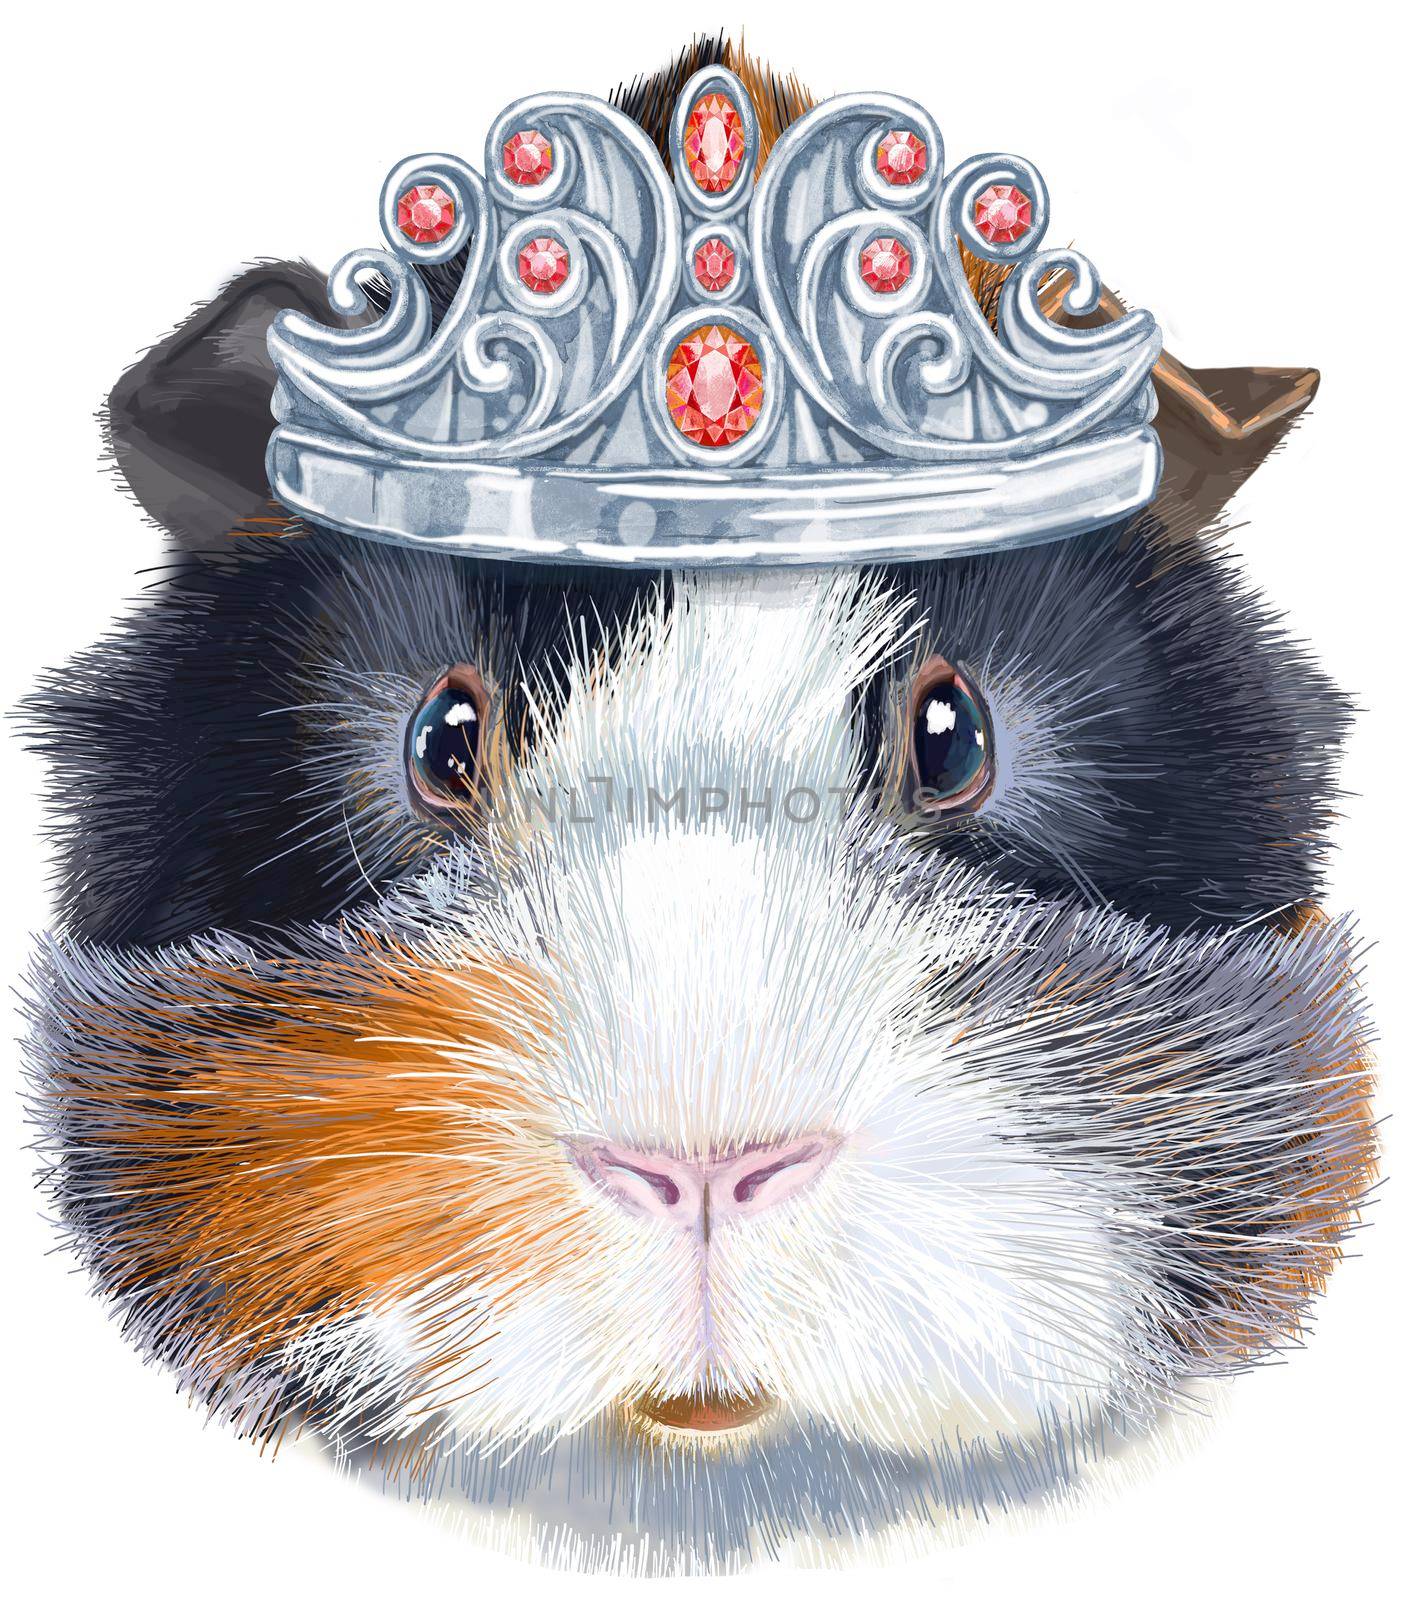 Watercolor portrait of abyssinian guinea pig in silver crown on white background by NataOmsk